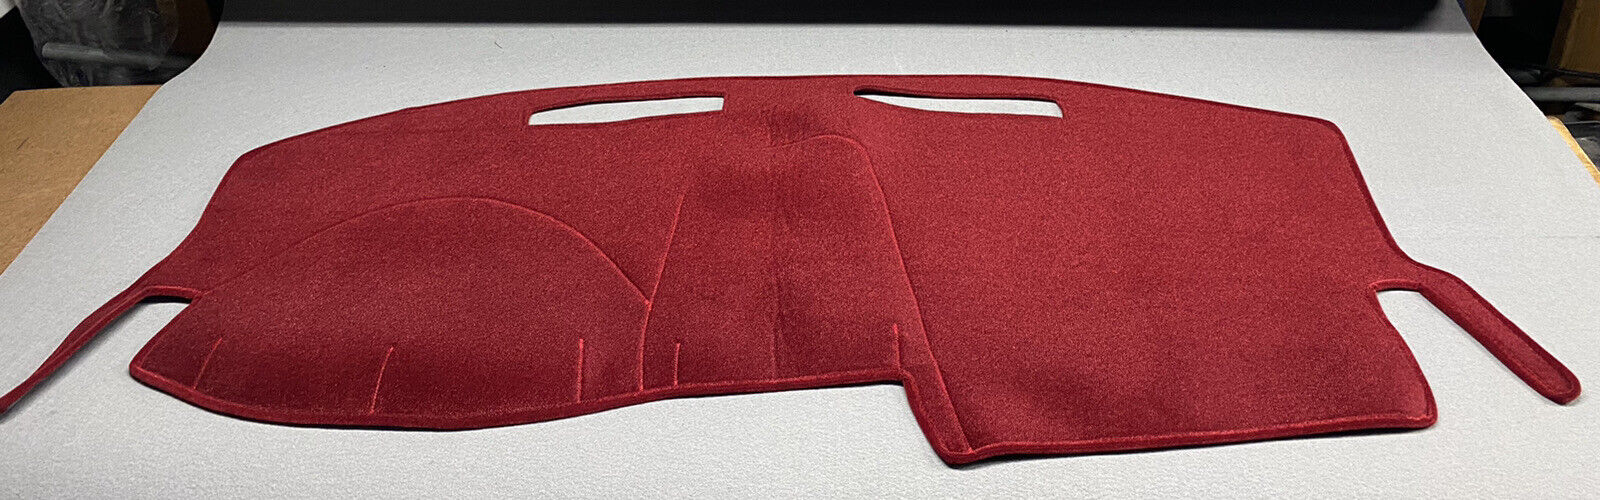 2008-2009-2010 DODGE CHARGER DASH COVER RED VELOUR 